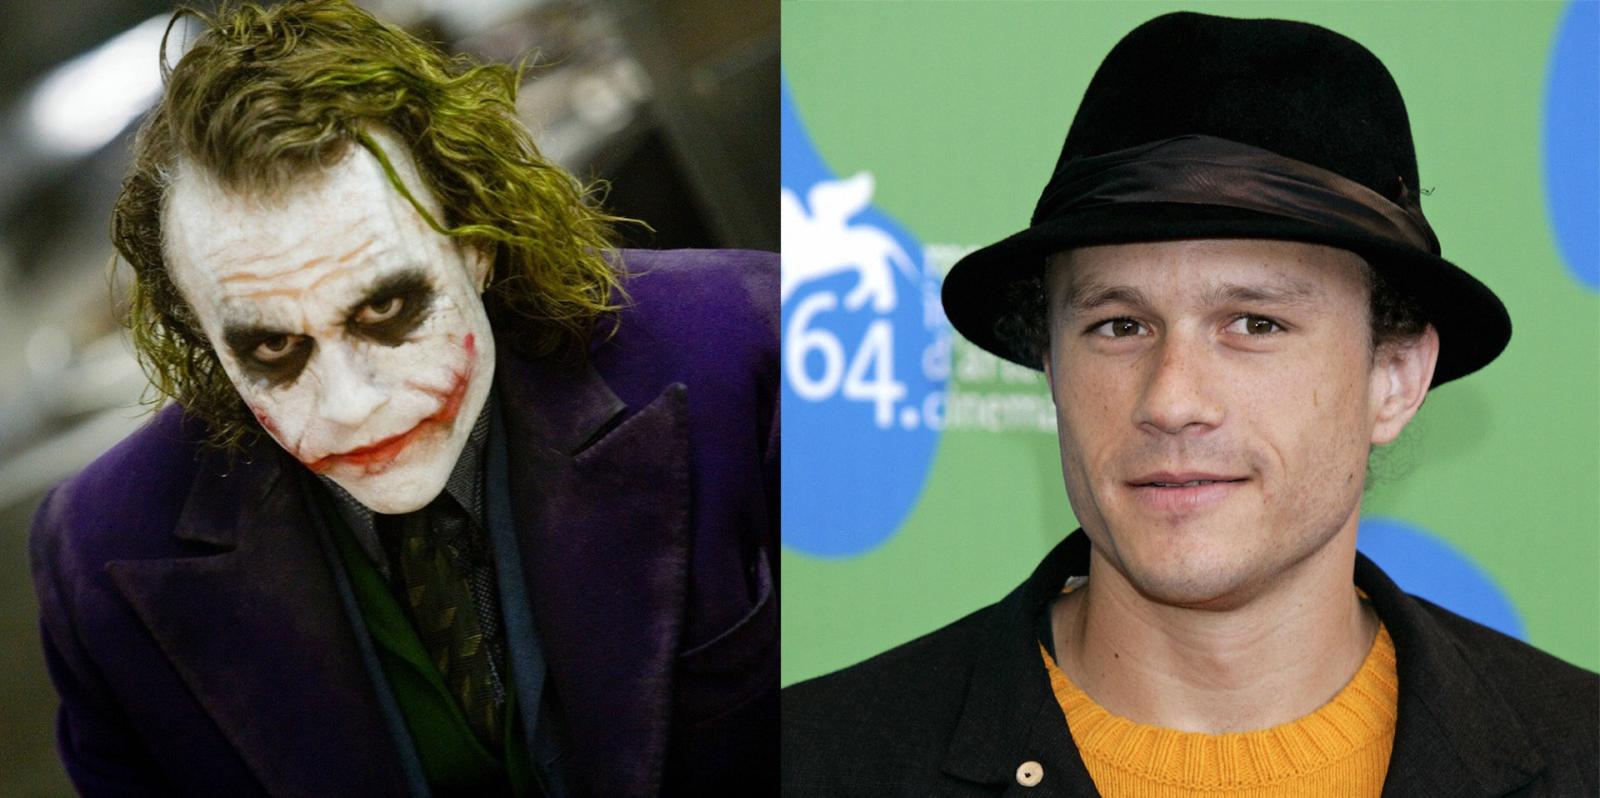 Then & Now: Whatever Happened to The Dark Knight Cast 15 Years Later? - image 2